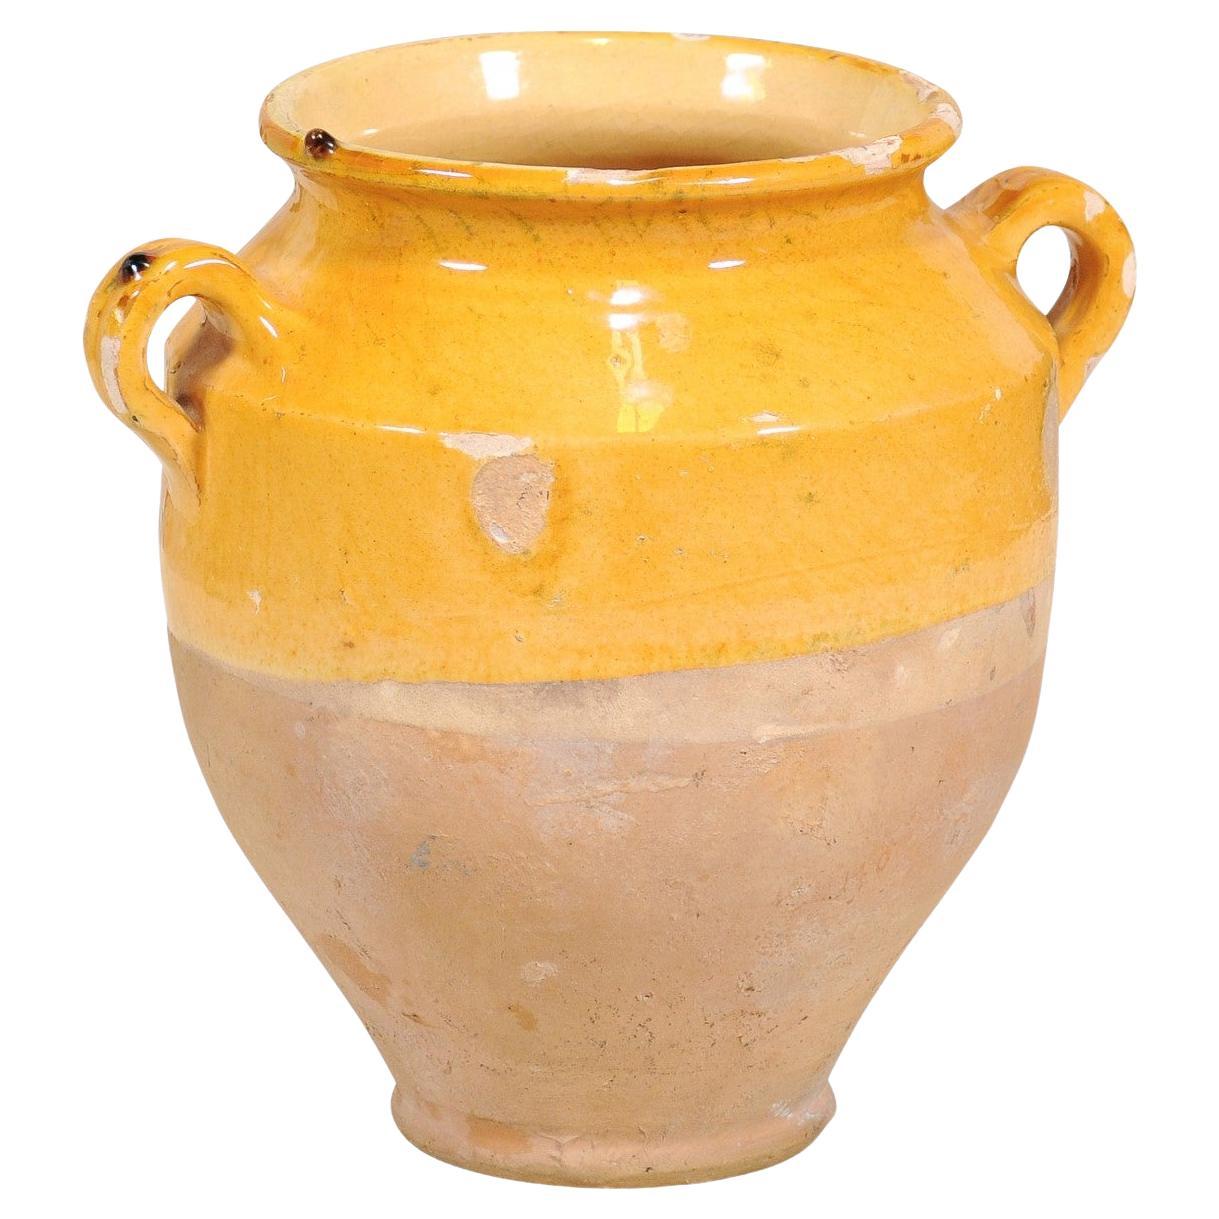 Yellow Glazed French Provincial Double Handled Pot à Confit Pottery